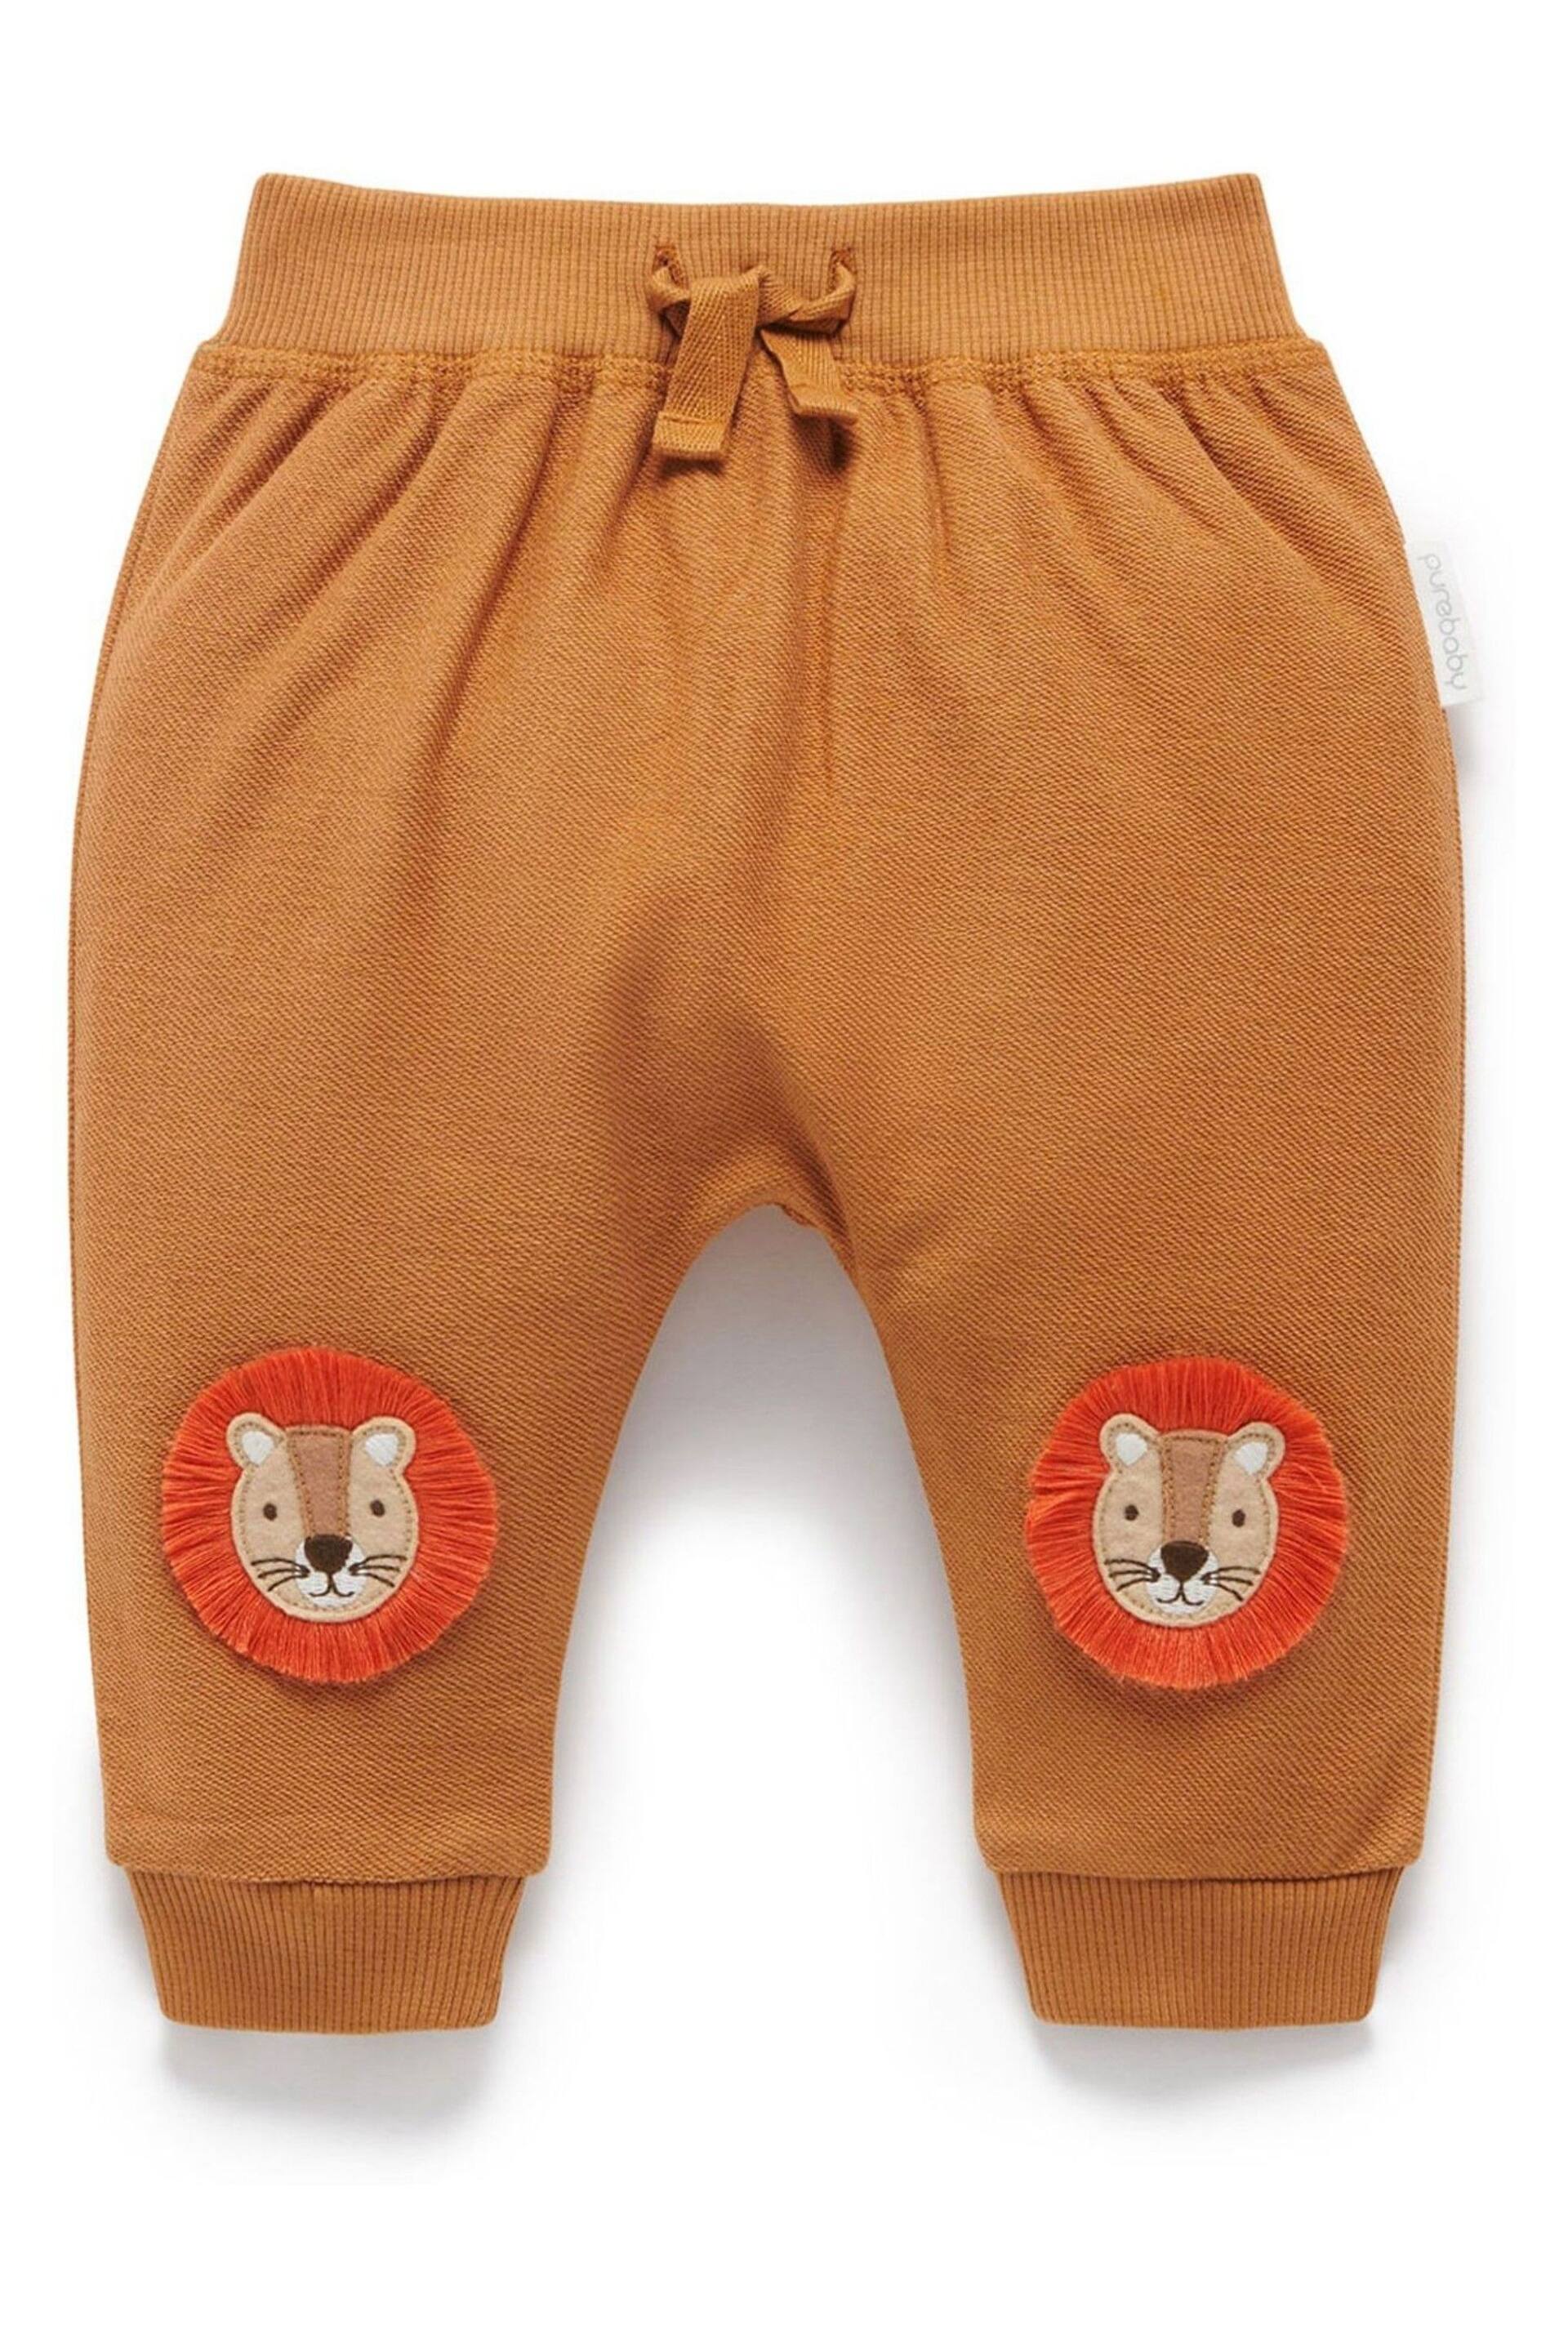 Purebaby Slouchy Brown Trousers - Image 1 of 4